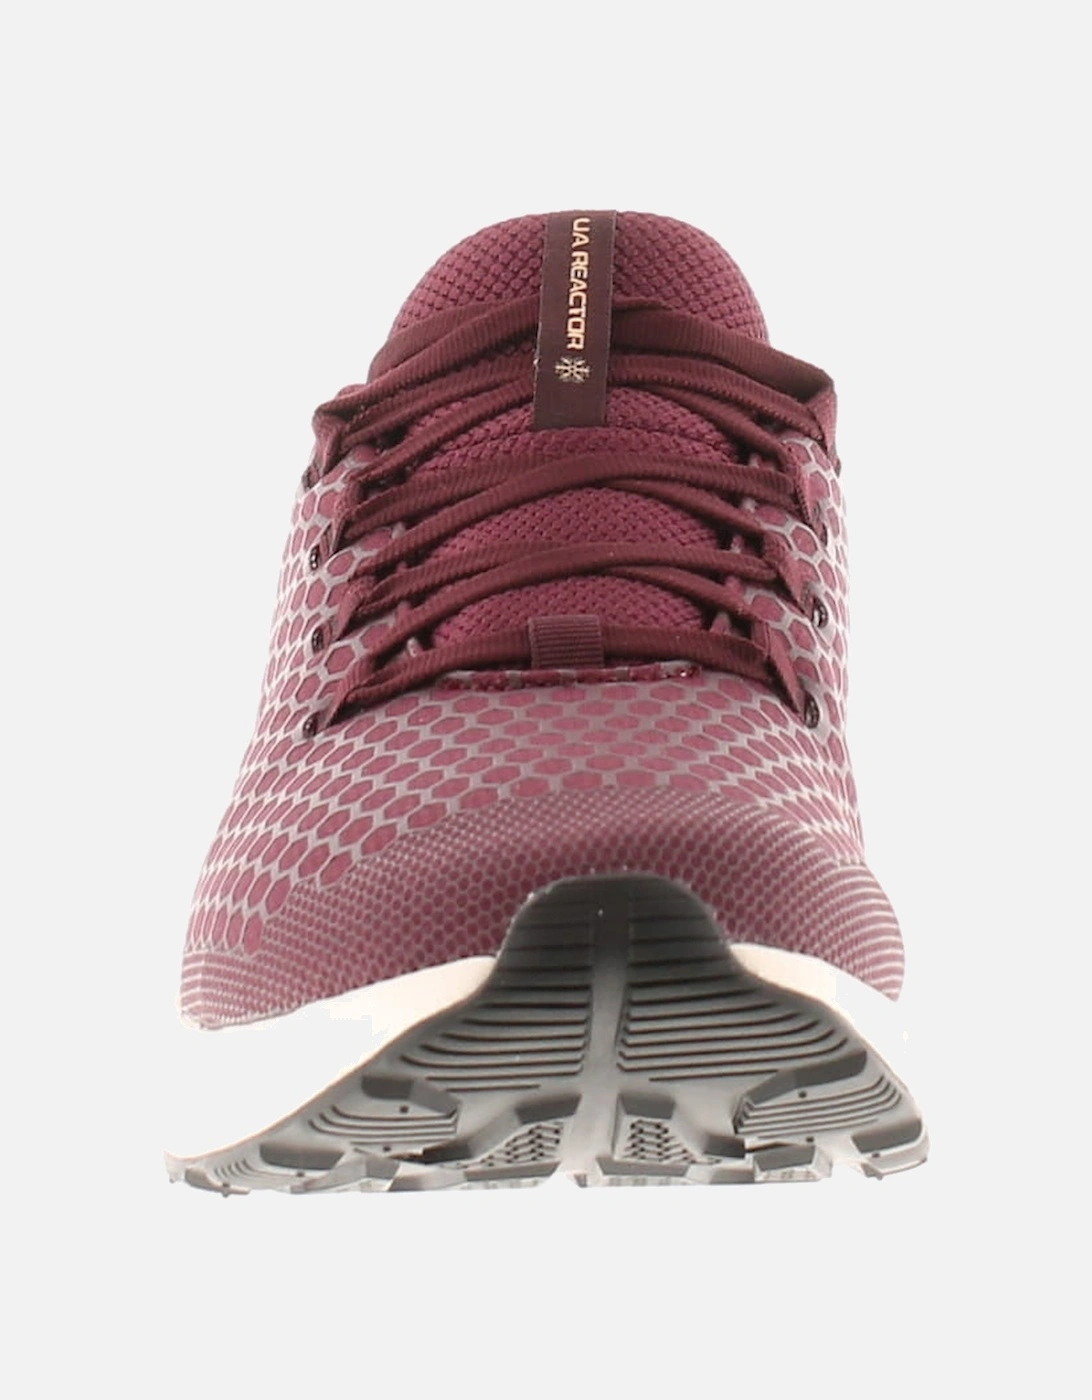 Womens Trainers Running  Hovr CG Reactor Lace Up maroon UK Size